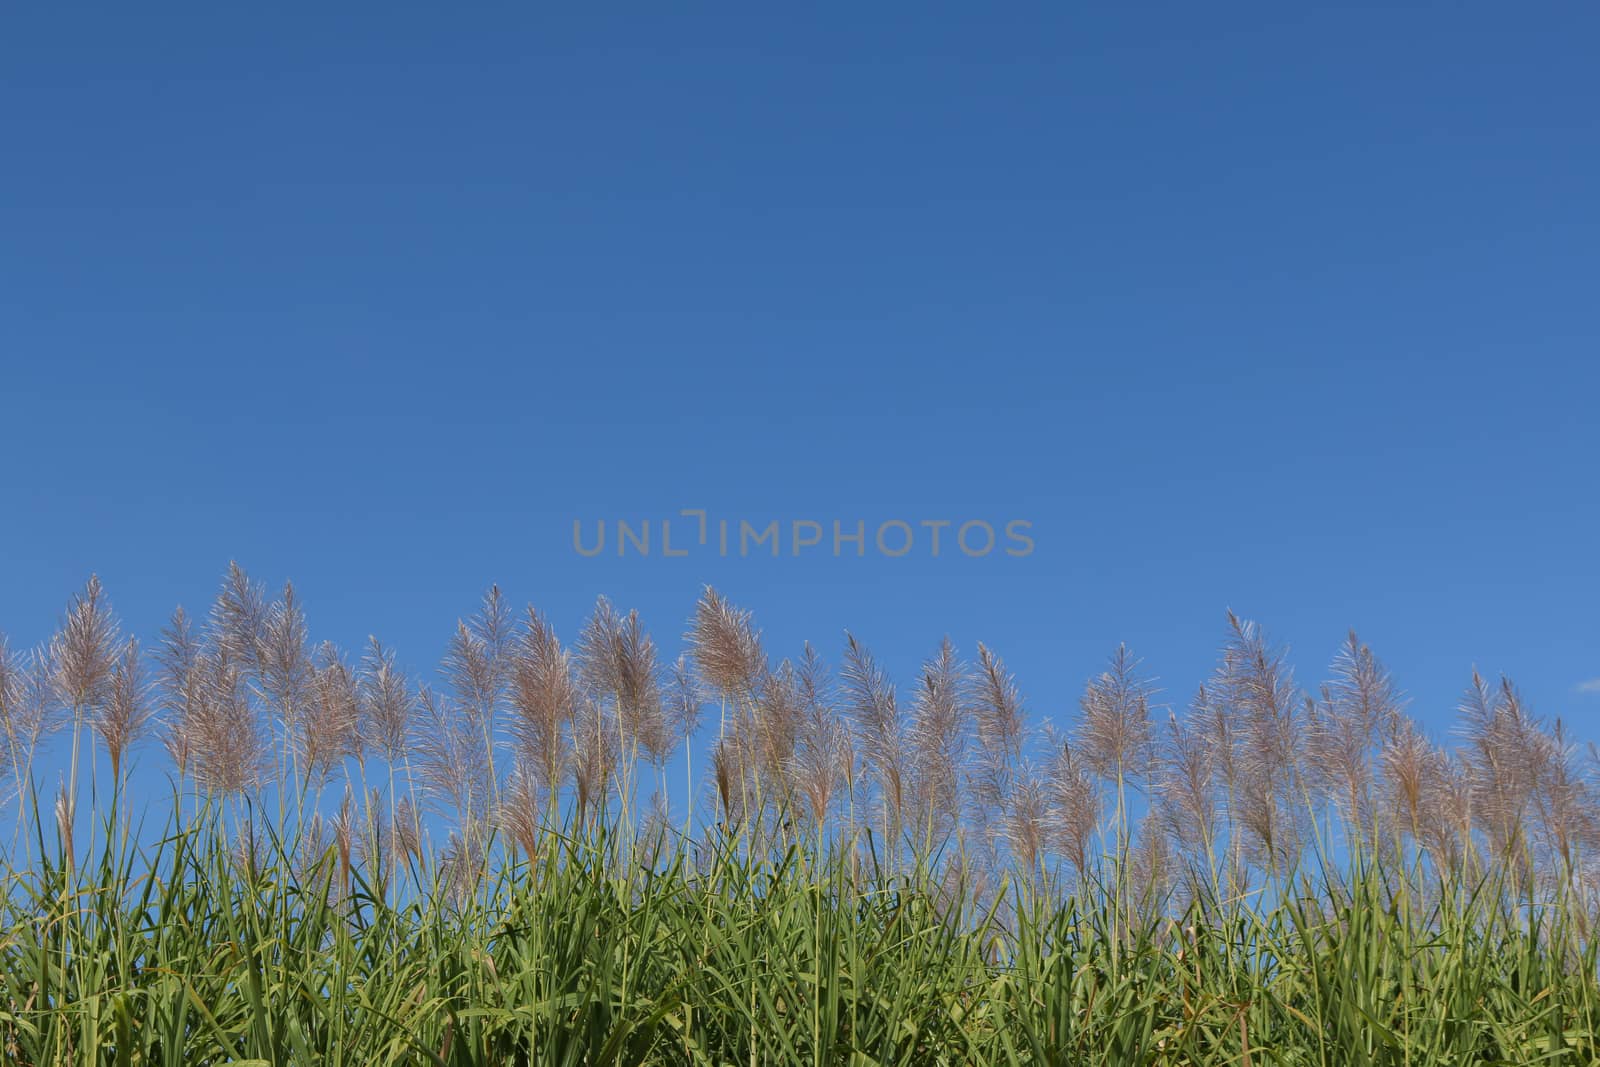 Sugar cane flower Sunrise,Beauty blue sky and clouds in daytime in Thailand